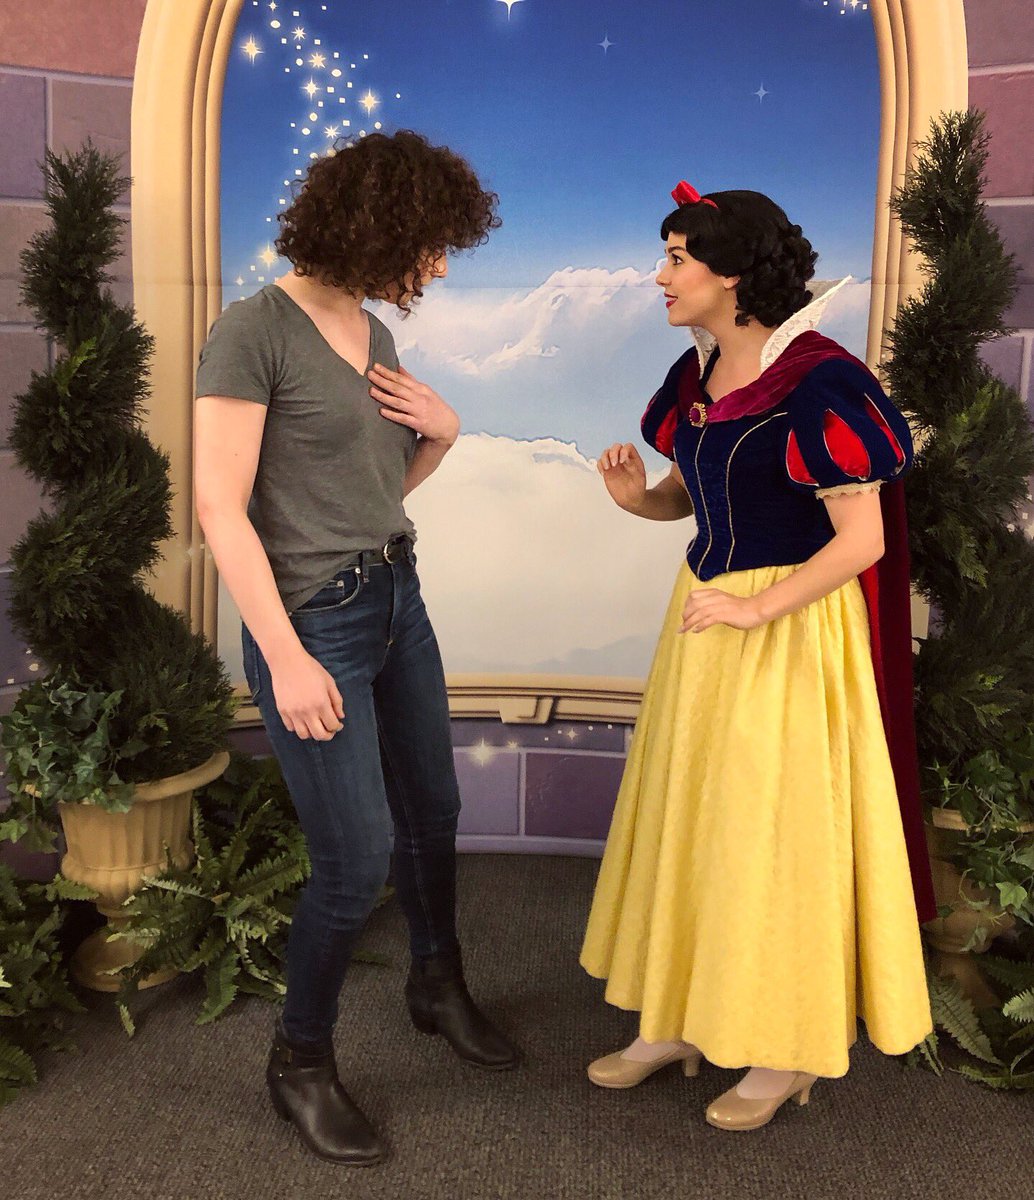 Snow White unexpectedly visited our workplace at Disney! She was so wholesome n sweet- it meant so much to me that without missing a beat, treated me like any other girl.

I honestly didn't expect it to hit so hard ?✨? 